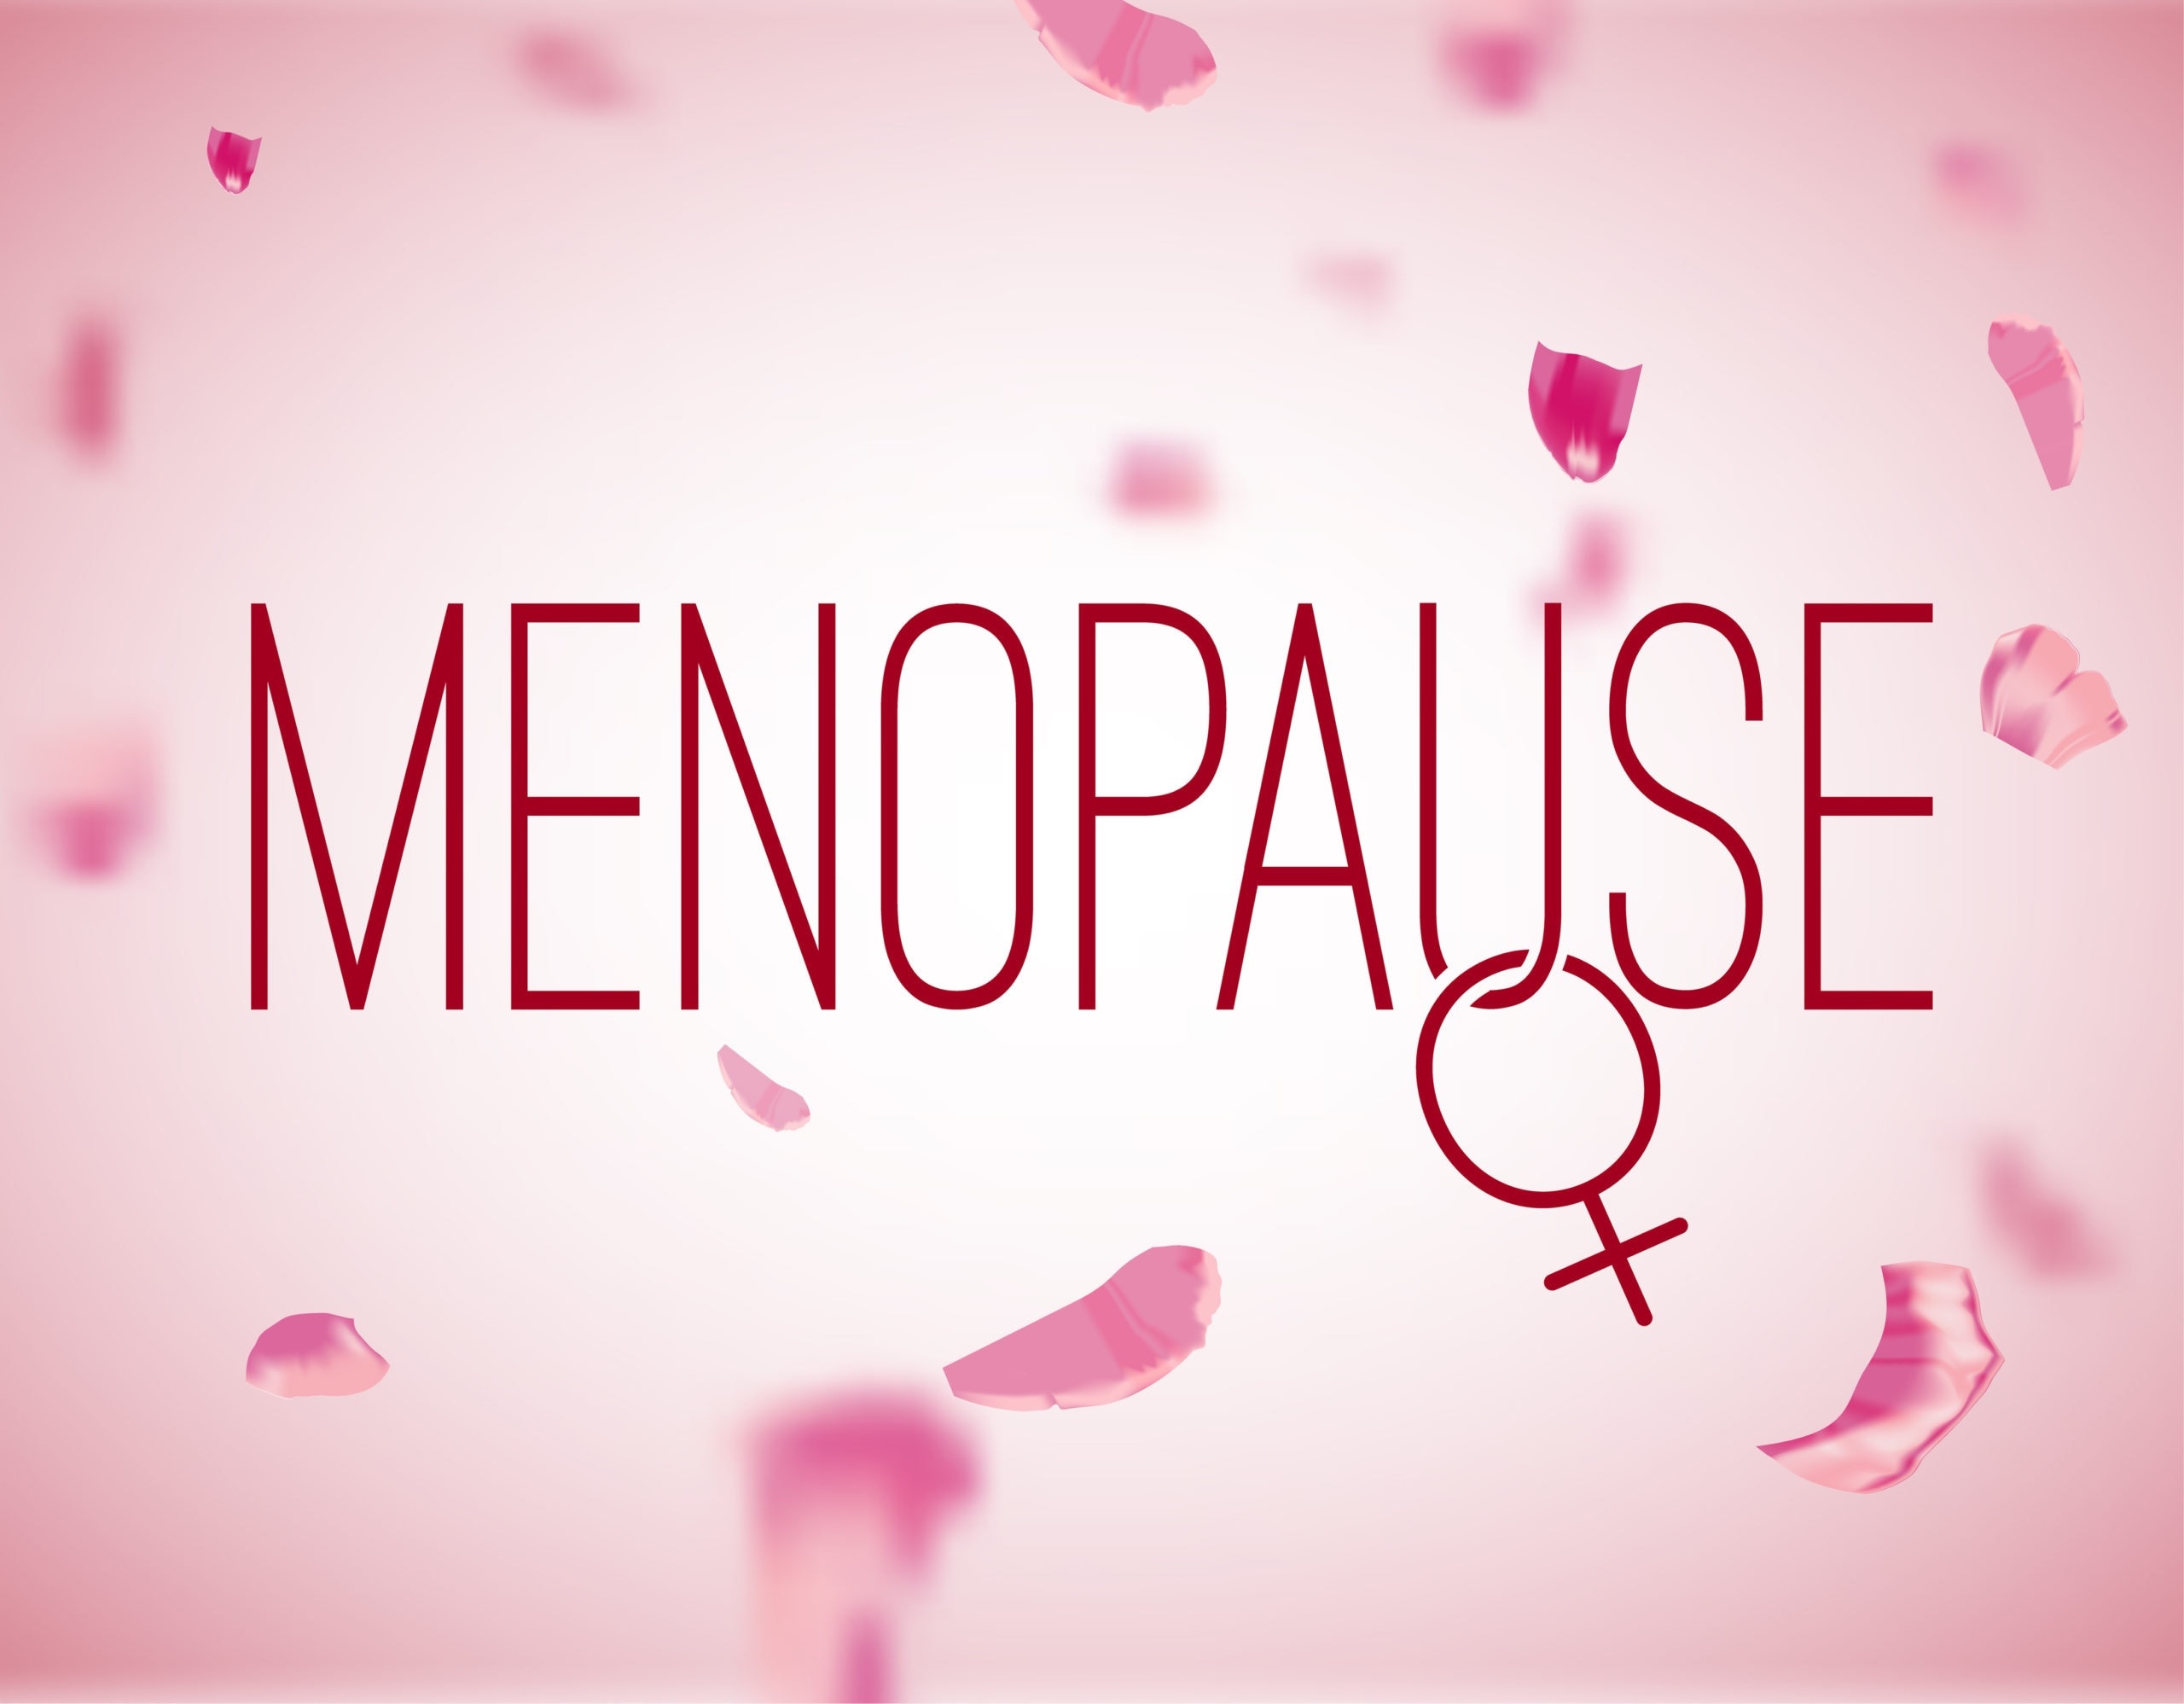 Menopause & Perimenopause: Signs, Symptoms, and Stages